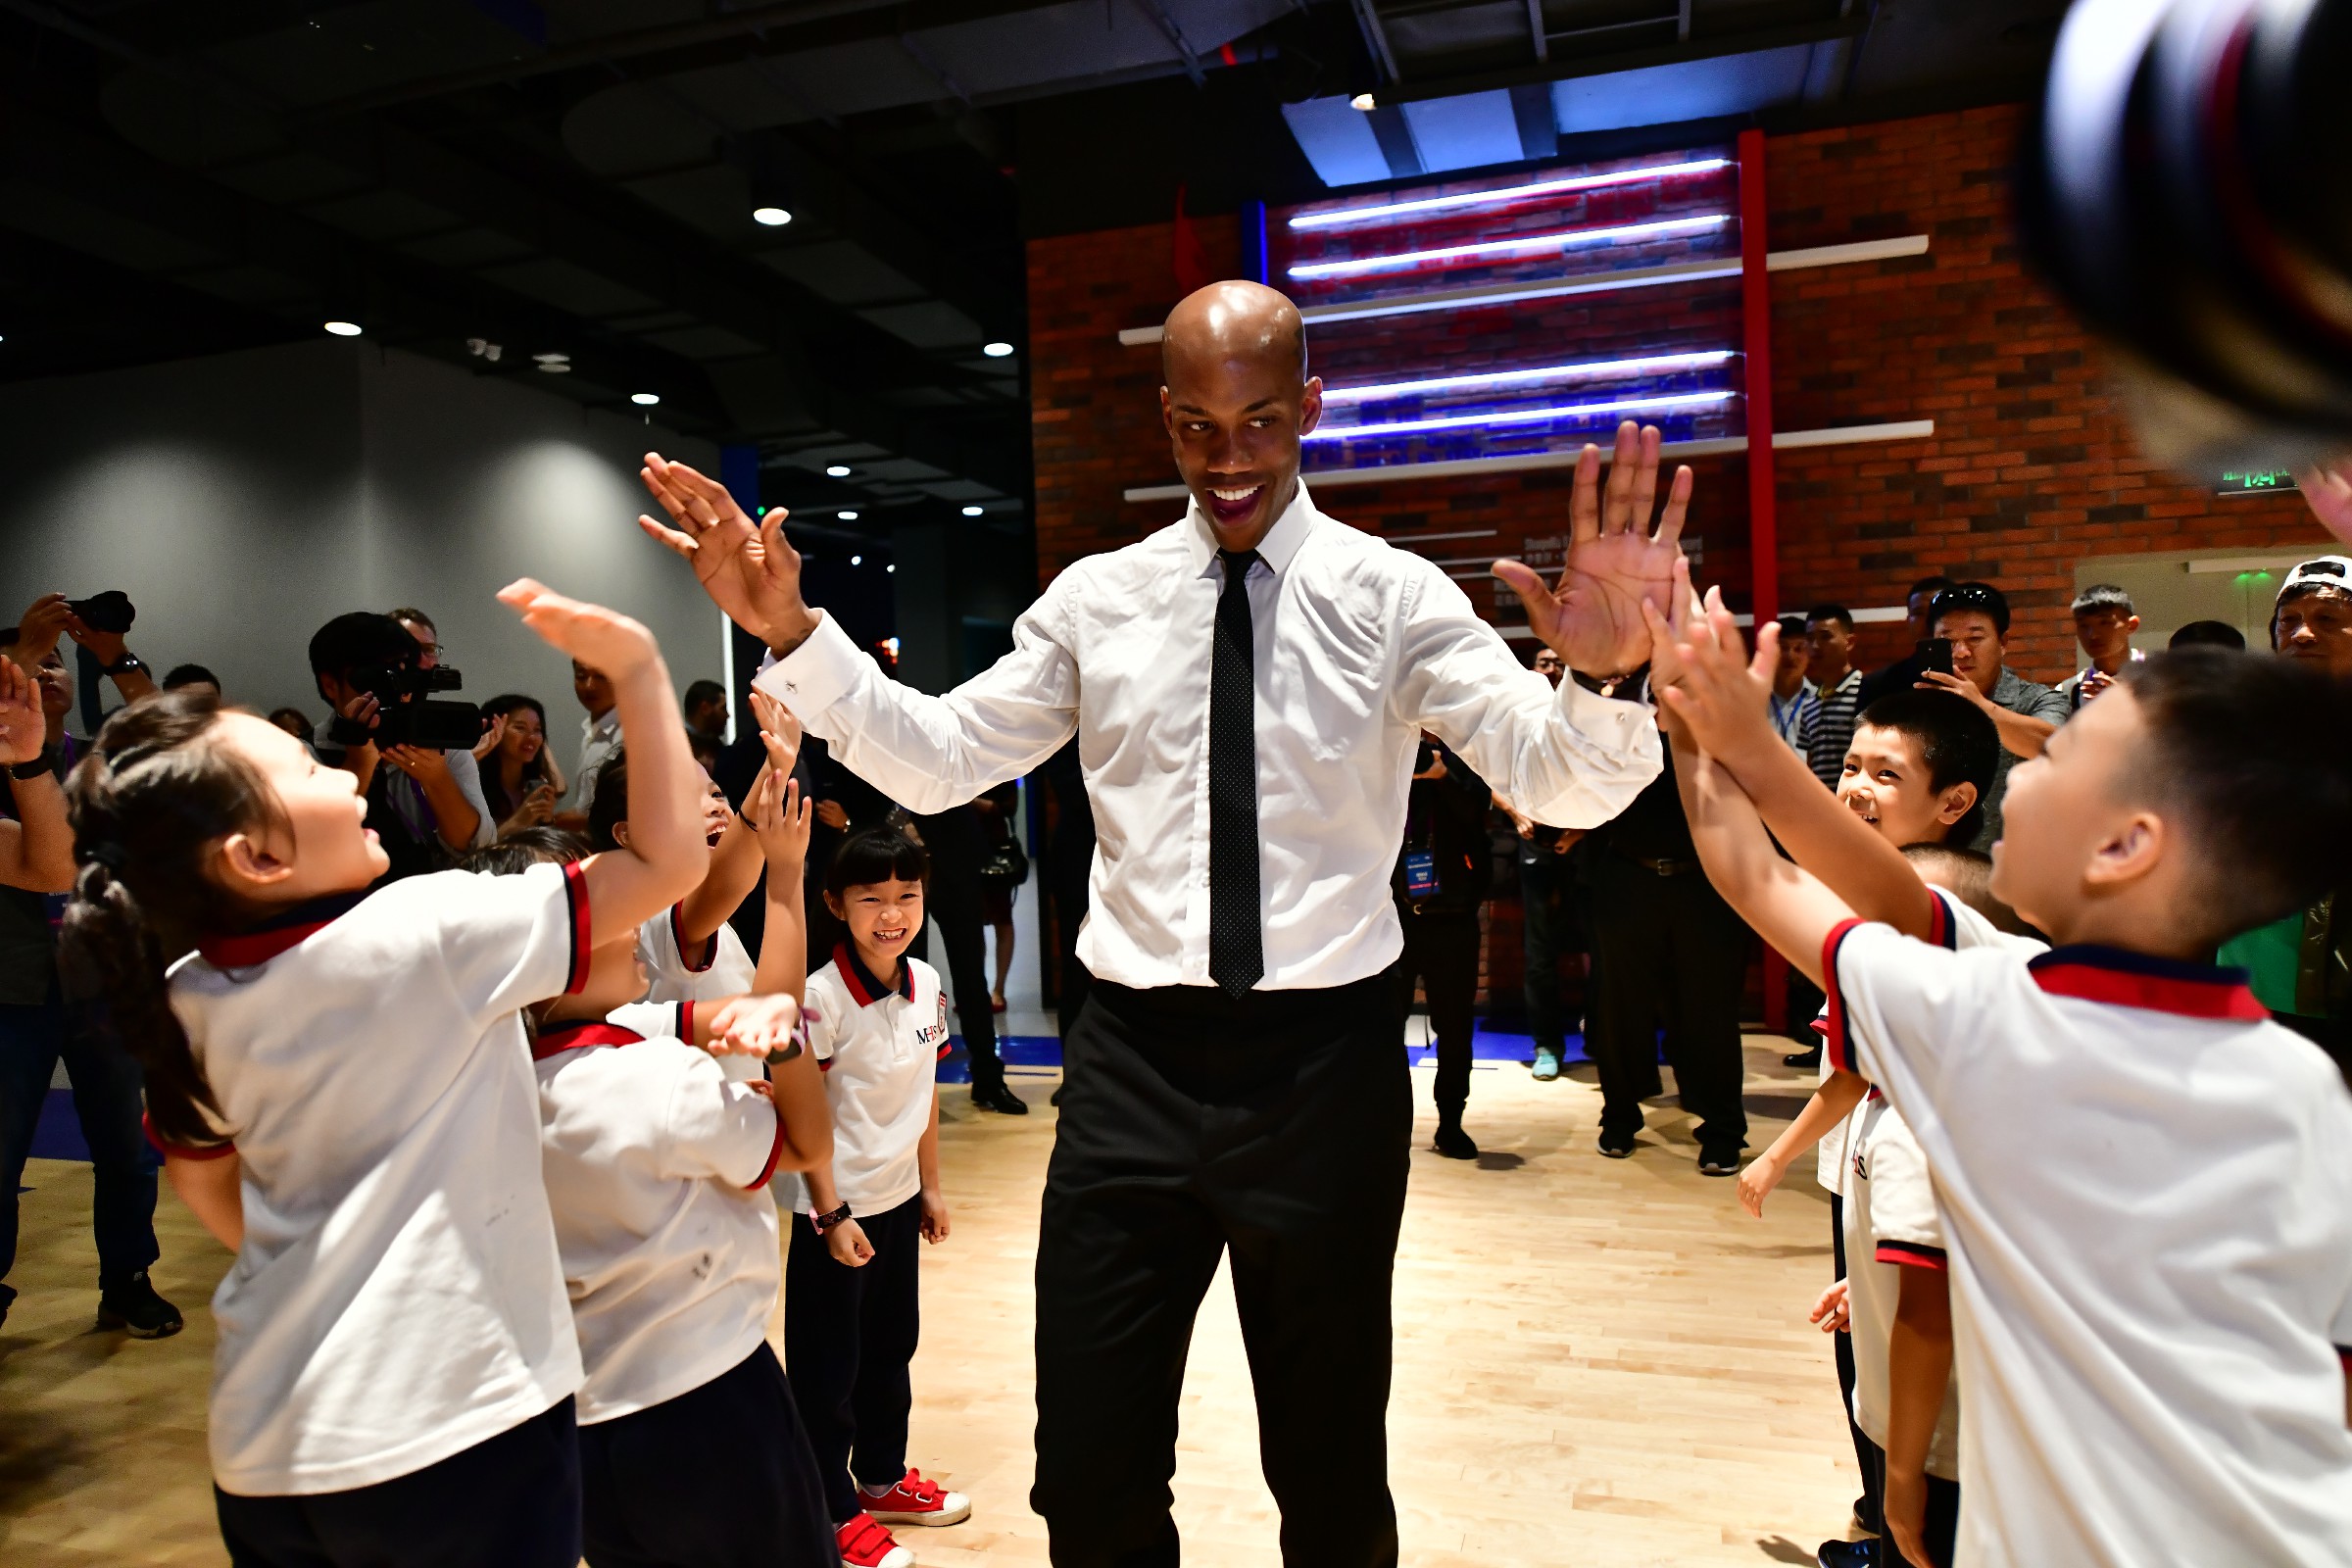 Photo 3 -NBA and CBA basketball legend Stephon Marbury hosts a clinic for children at the opening of the NBA Exhibit at Mission Hills Haikou in Hainan, China